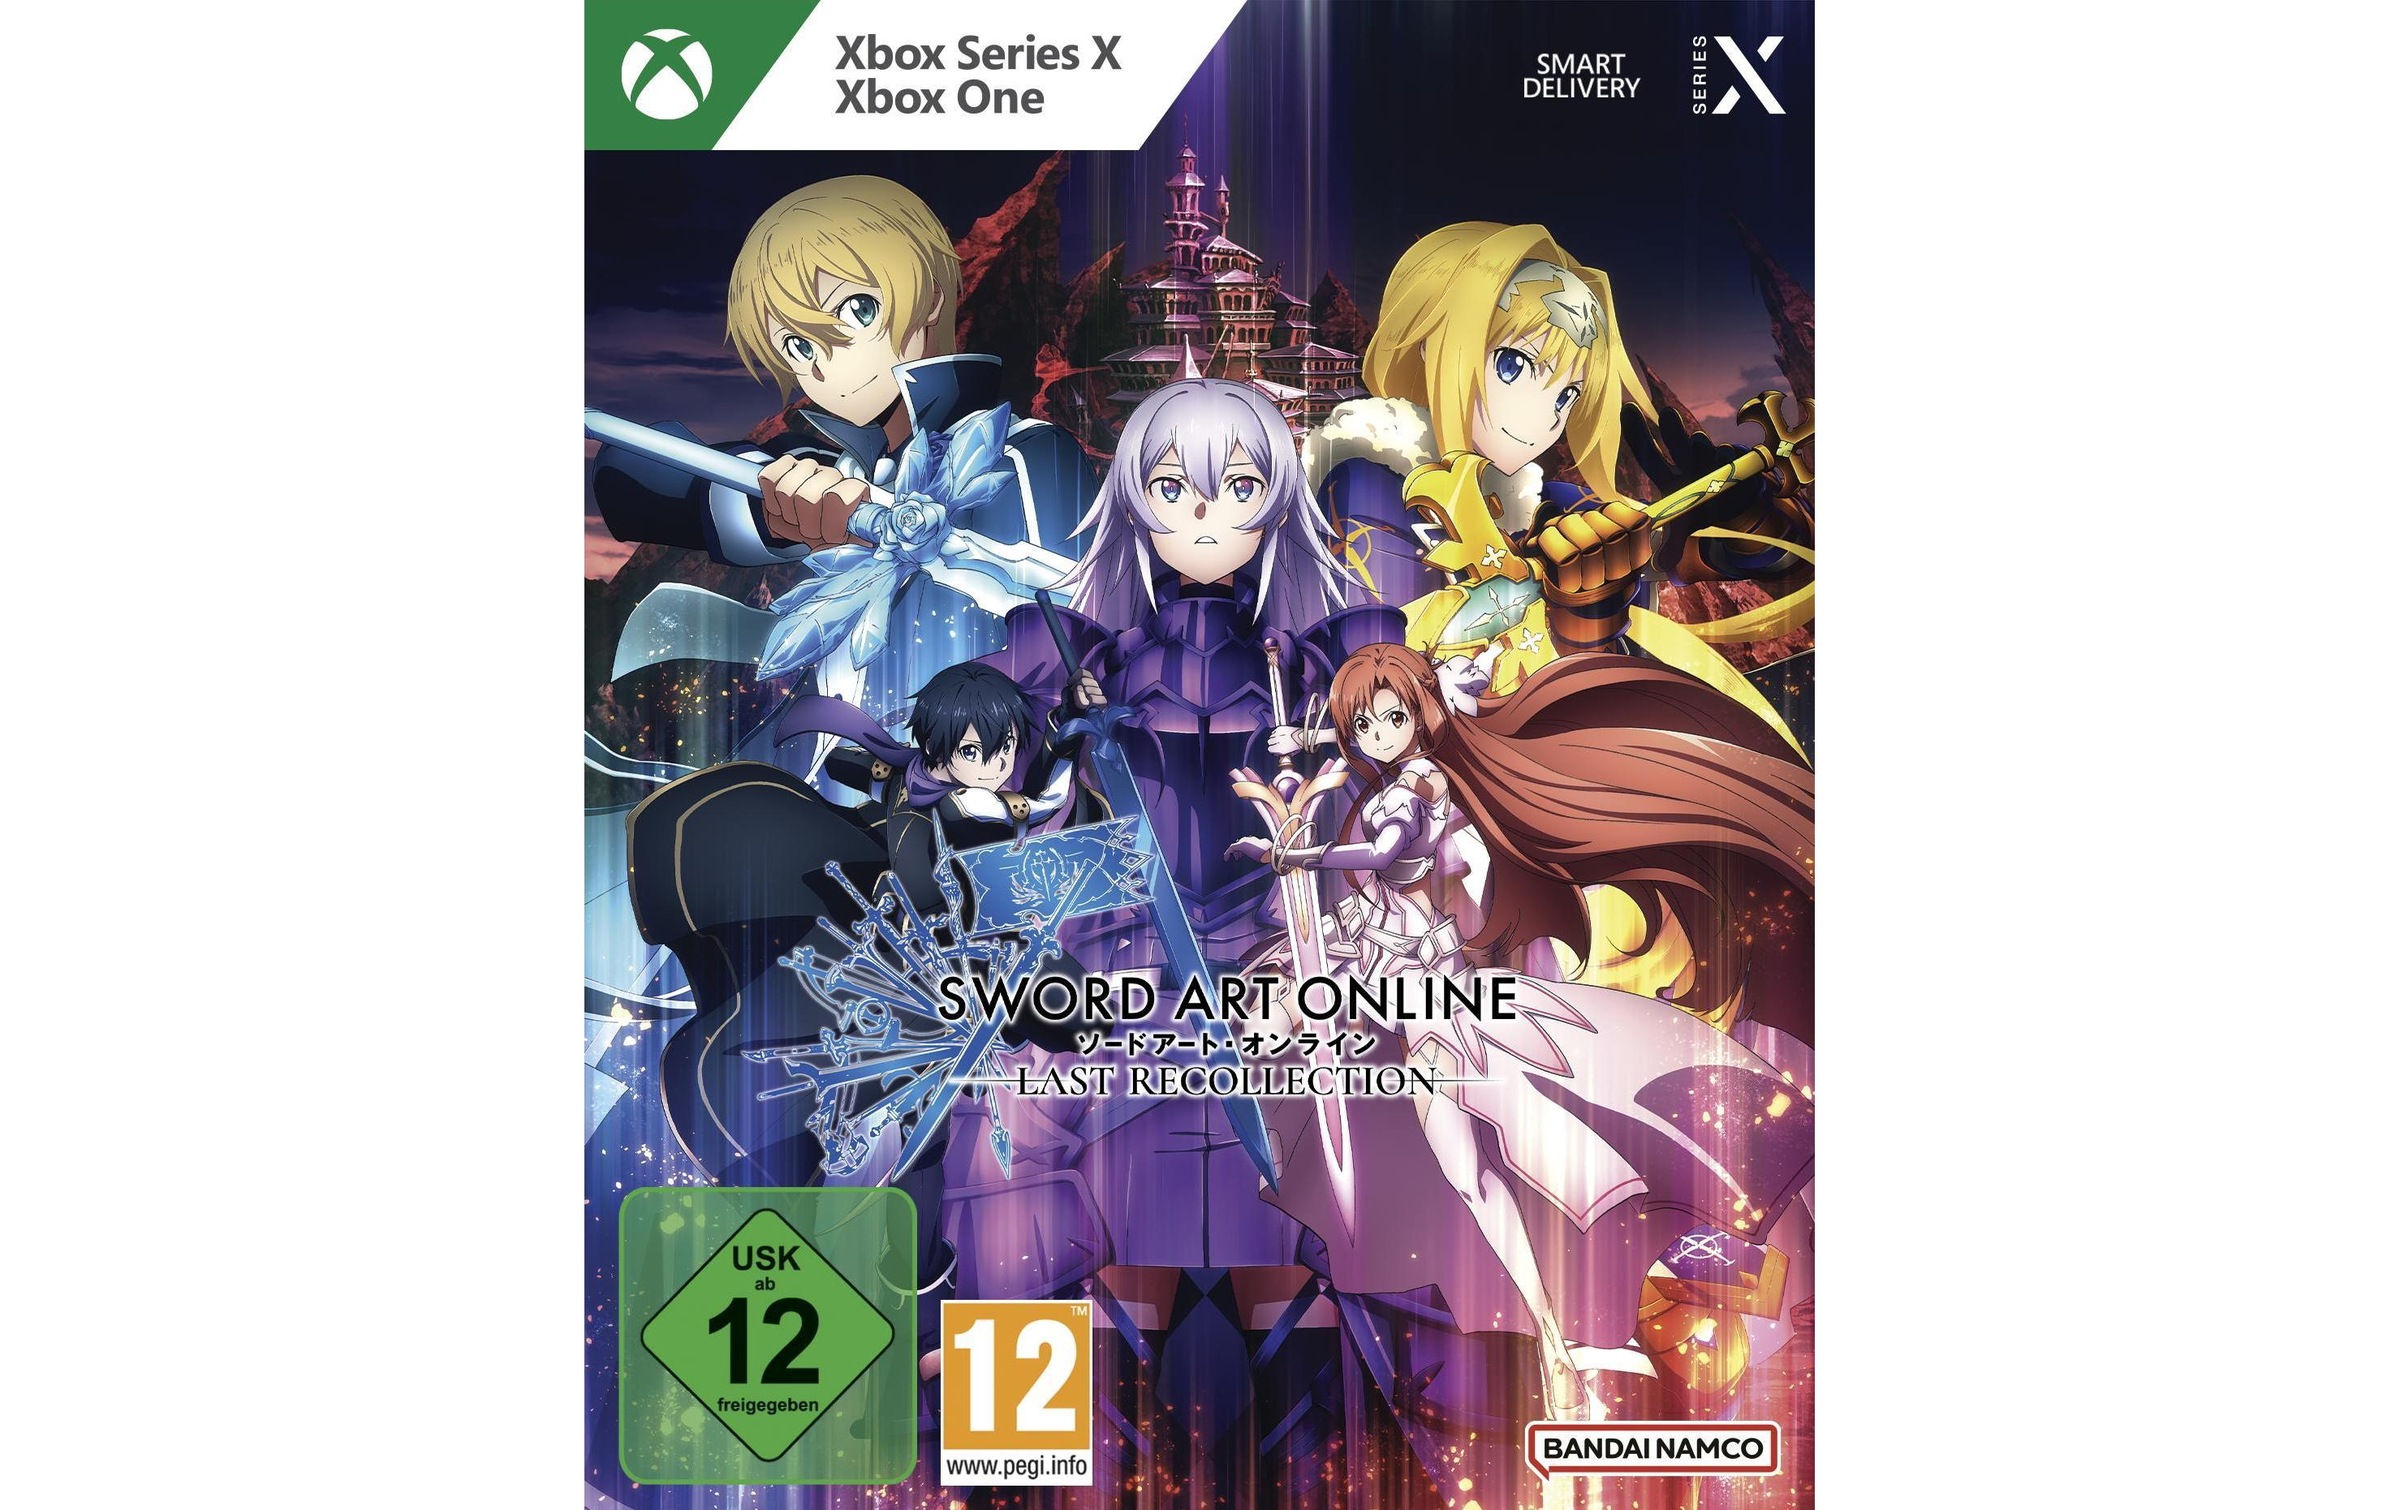 Spielesoftware »Namco Sword Art Online: Last Recollection«, Xbox One-Xbox Series X